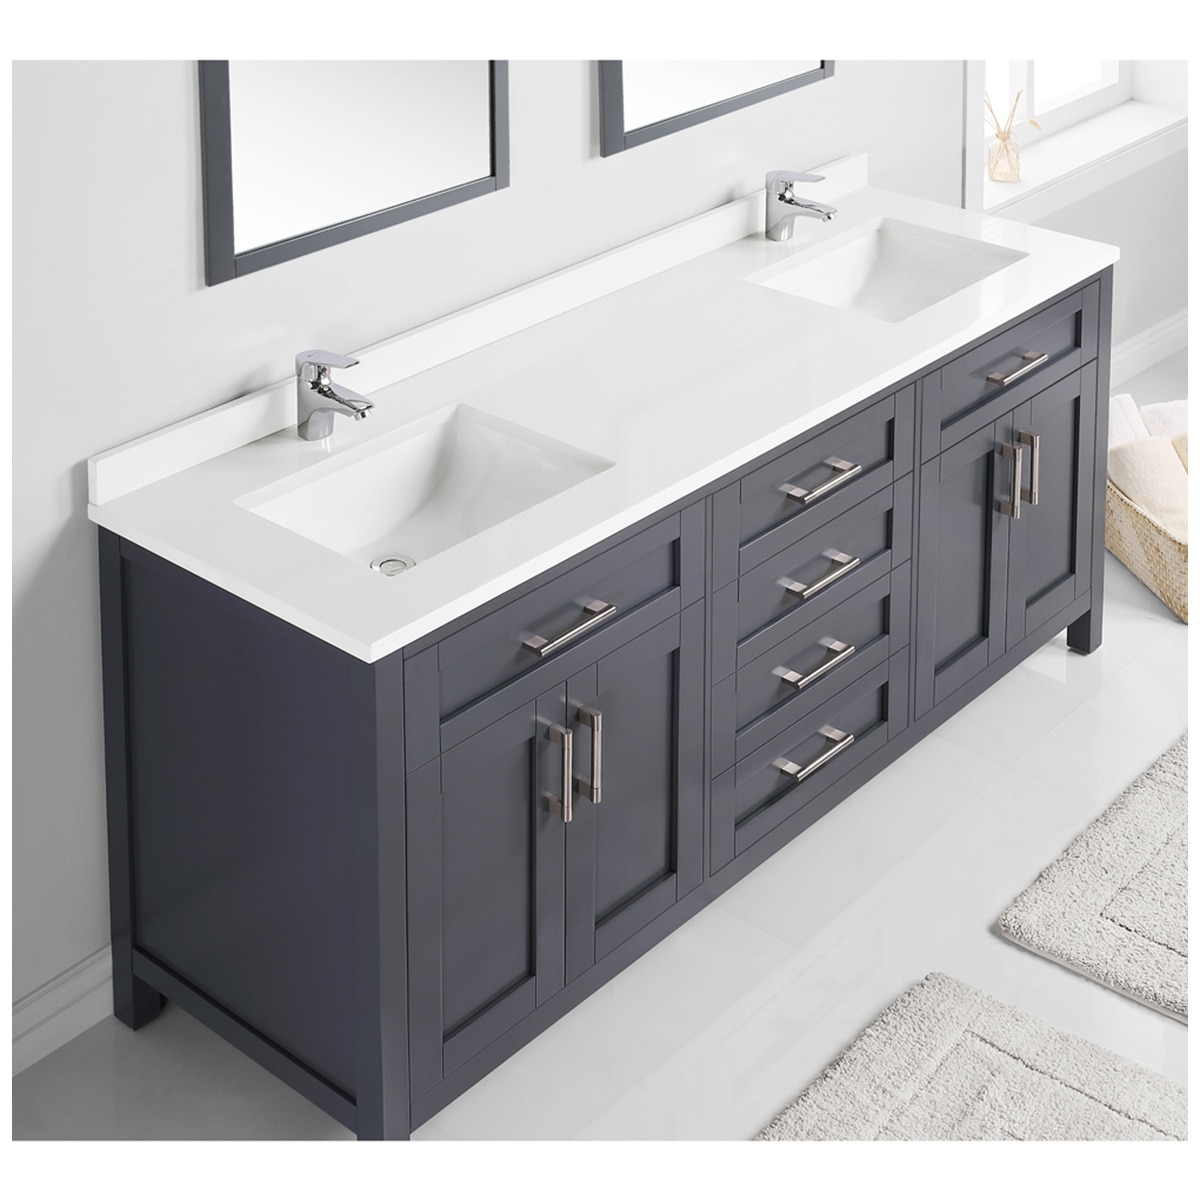 OVE 72" Bath Charcoal Lakeview Vanity